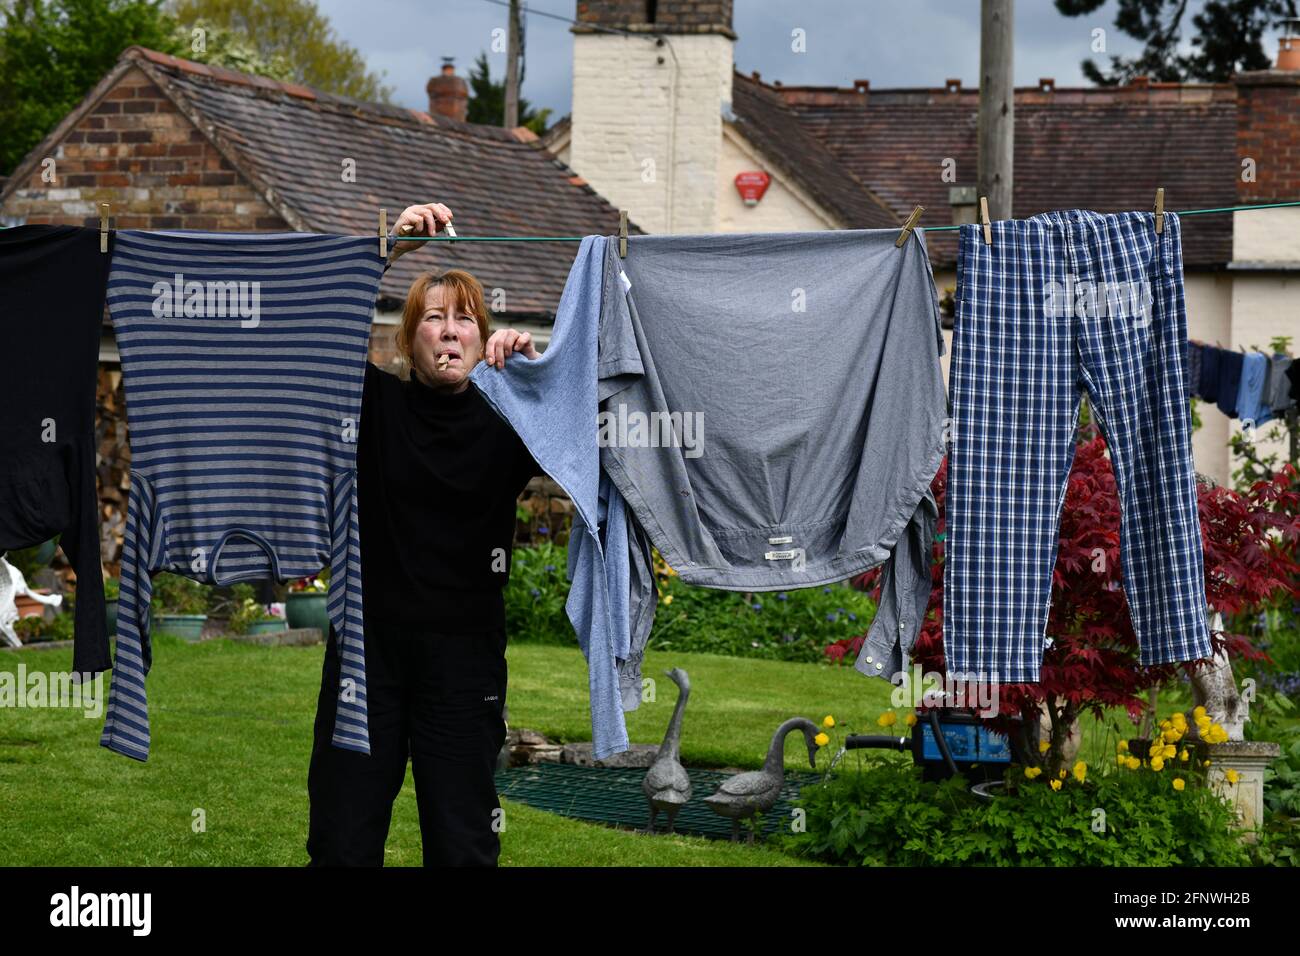 Woman hanging washing on clothes line with pegs in the garden Britain, Uk. drying outside exterior household chores jobs work women womens mother wife Stock Photo